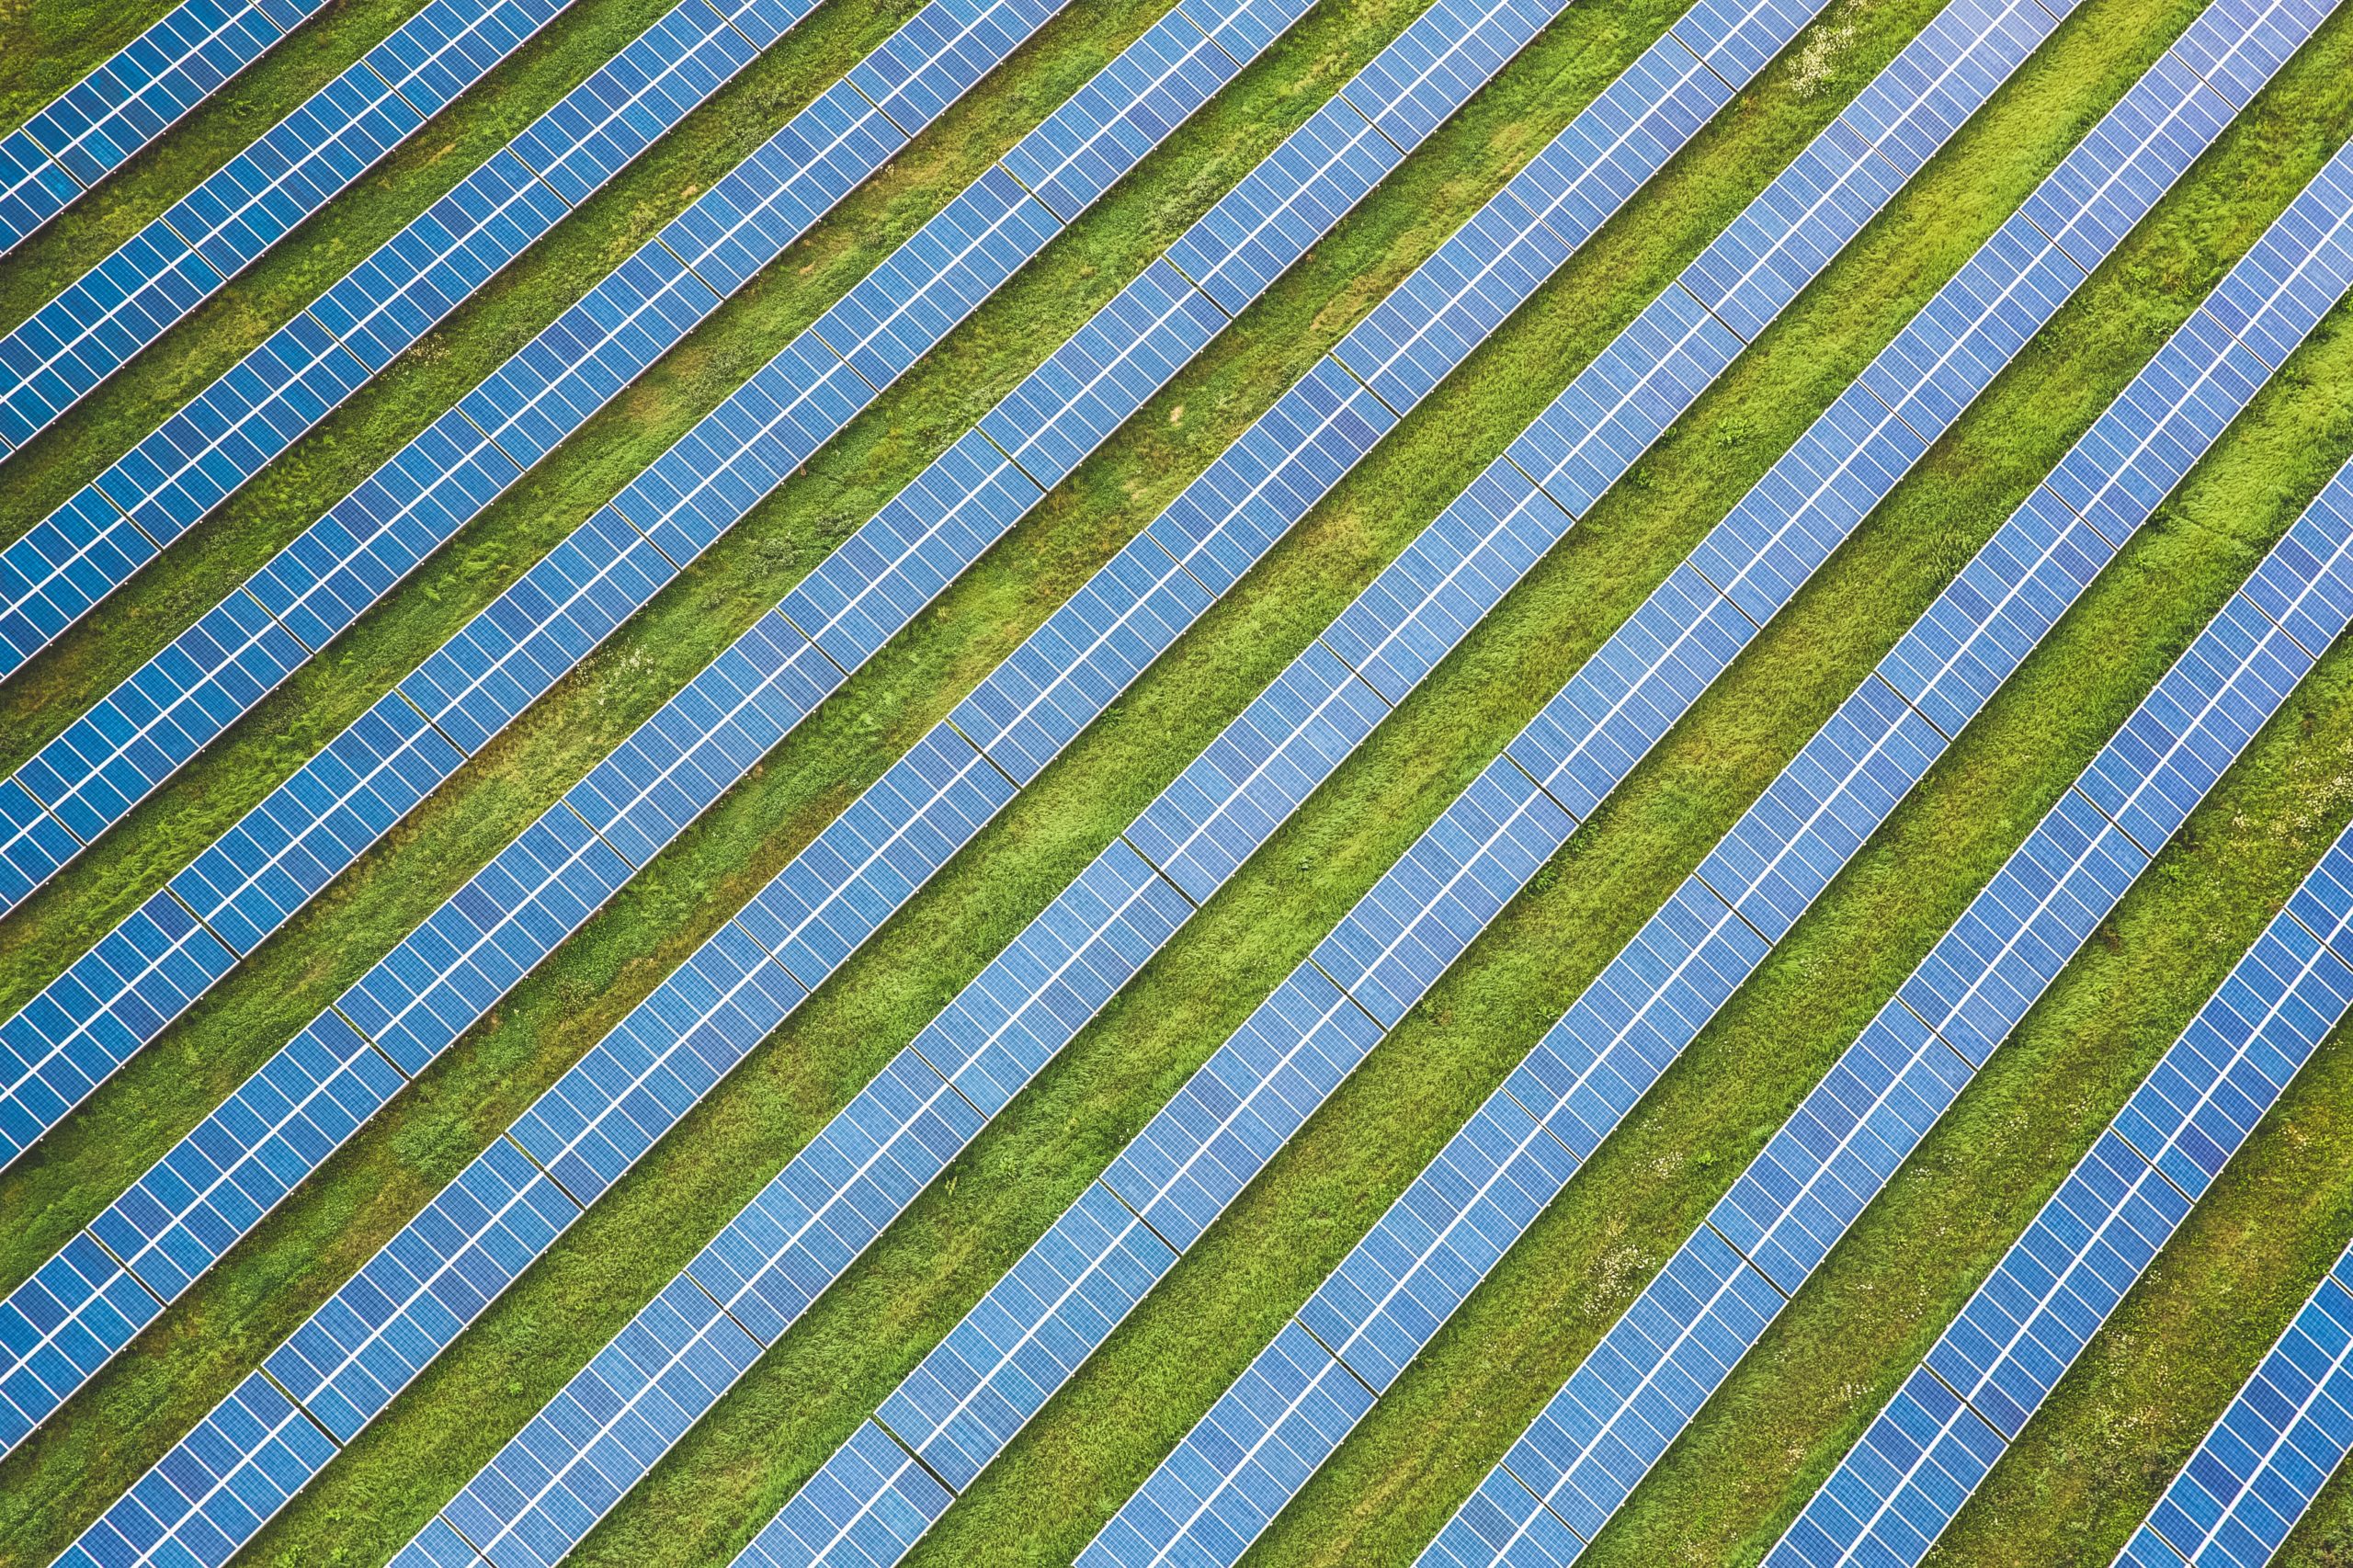 A bird's-eye view of rows of solar panels.